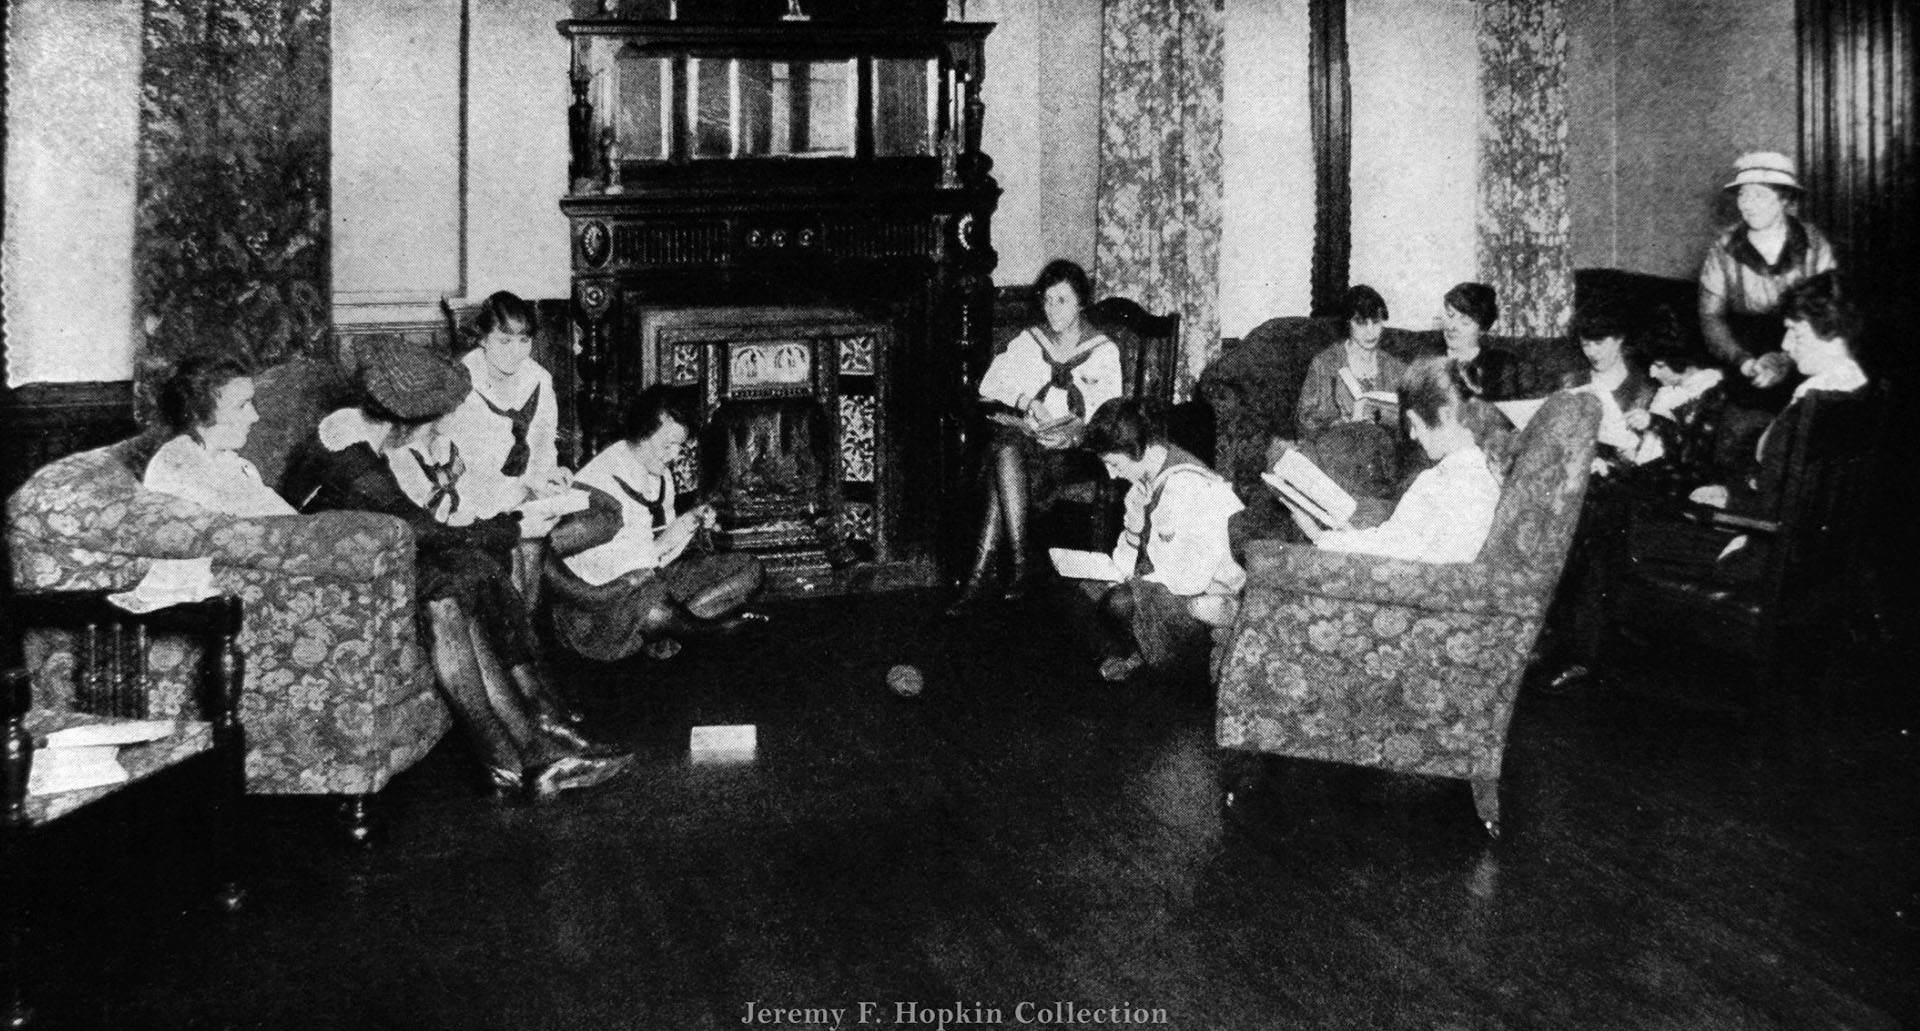 The big sitting room at the Eaton Women's Club, 1900s